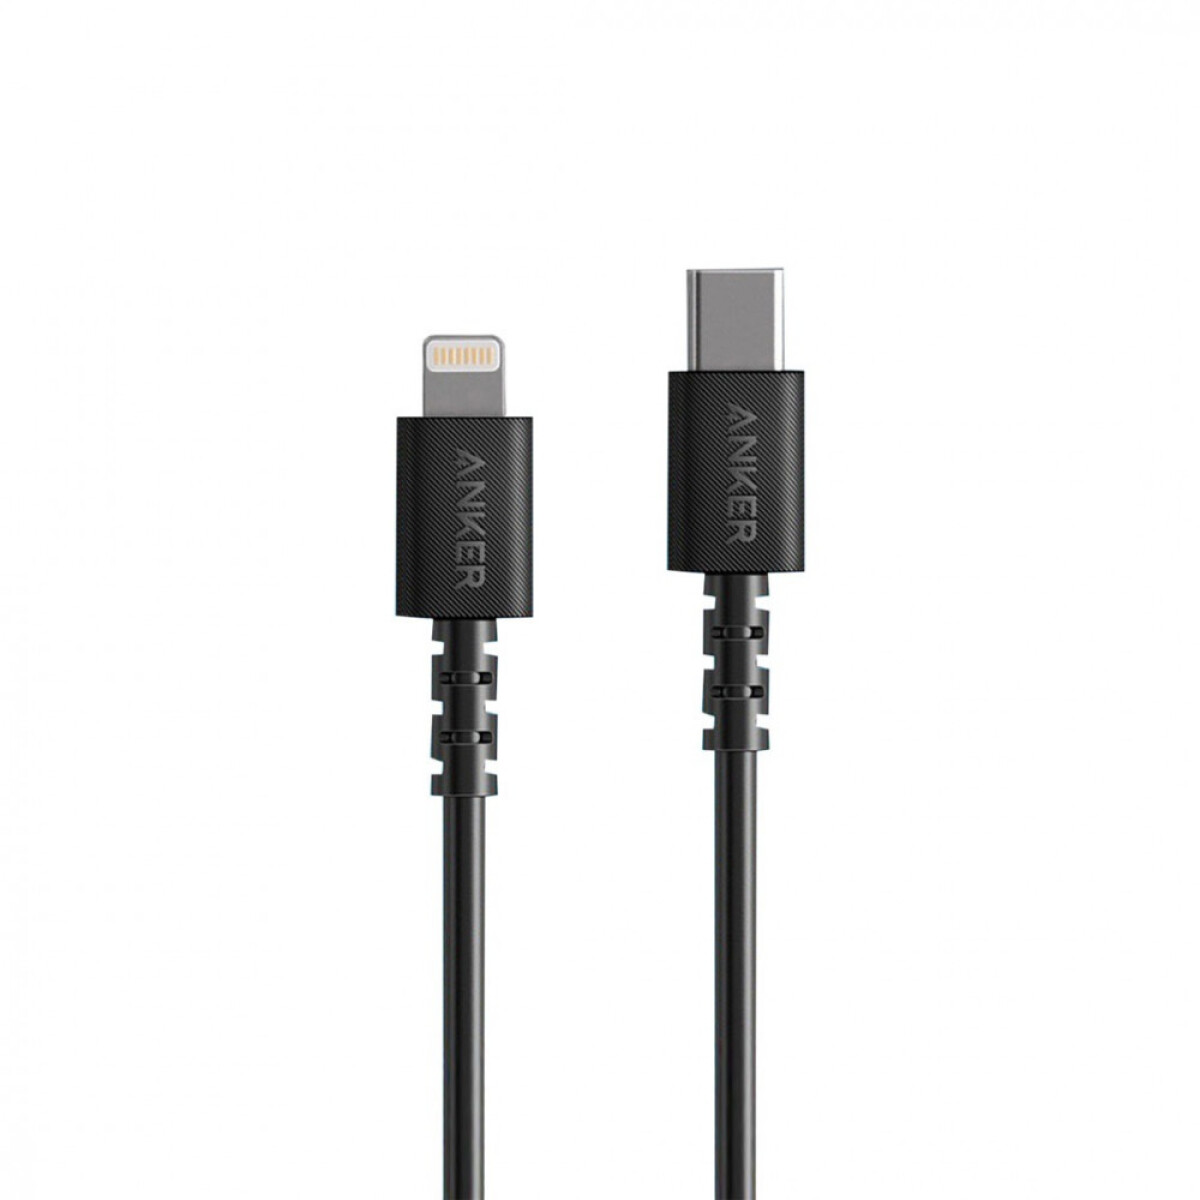 Cable anker powerline select usb-c a lightning 1.8m - Negro 